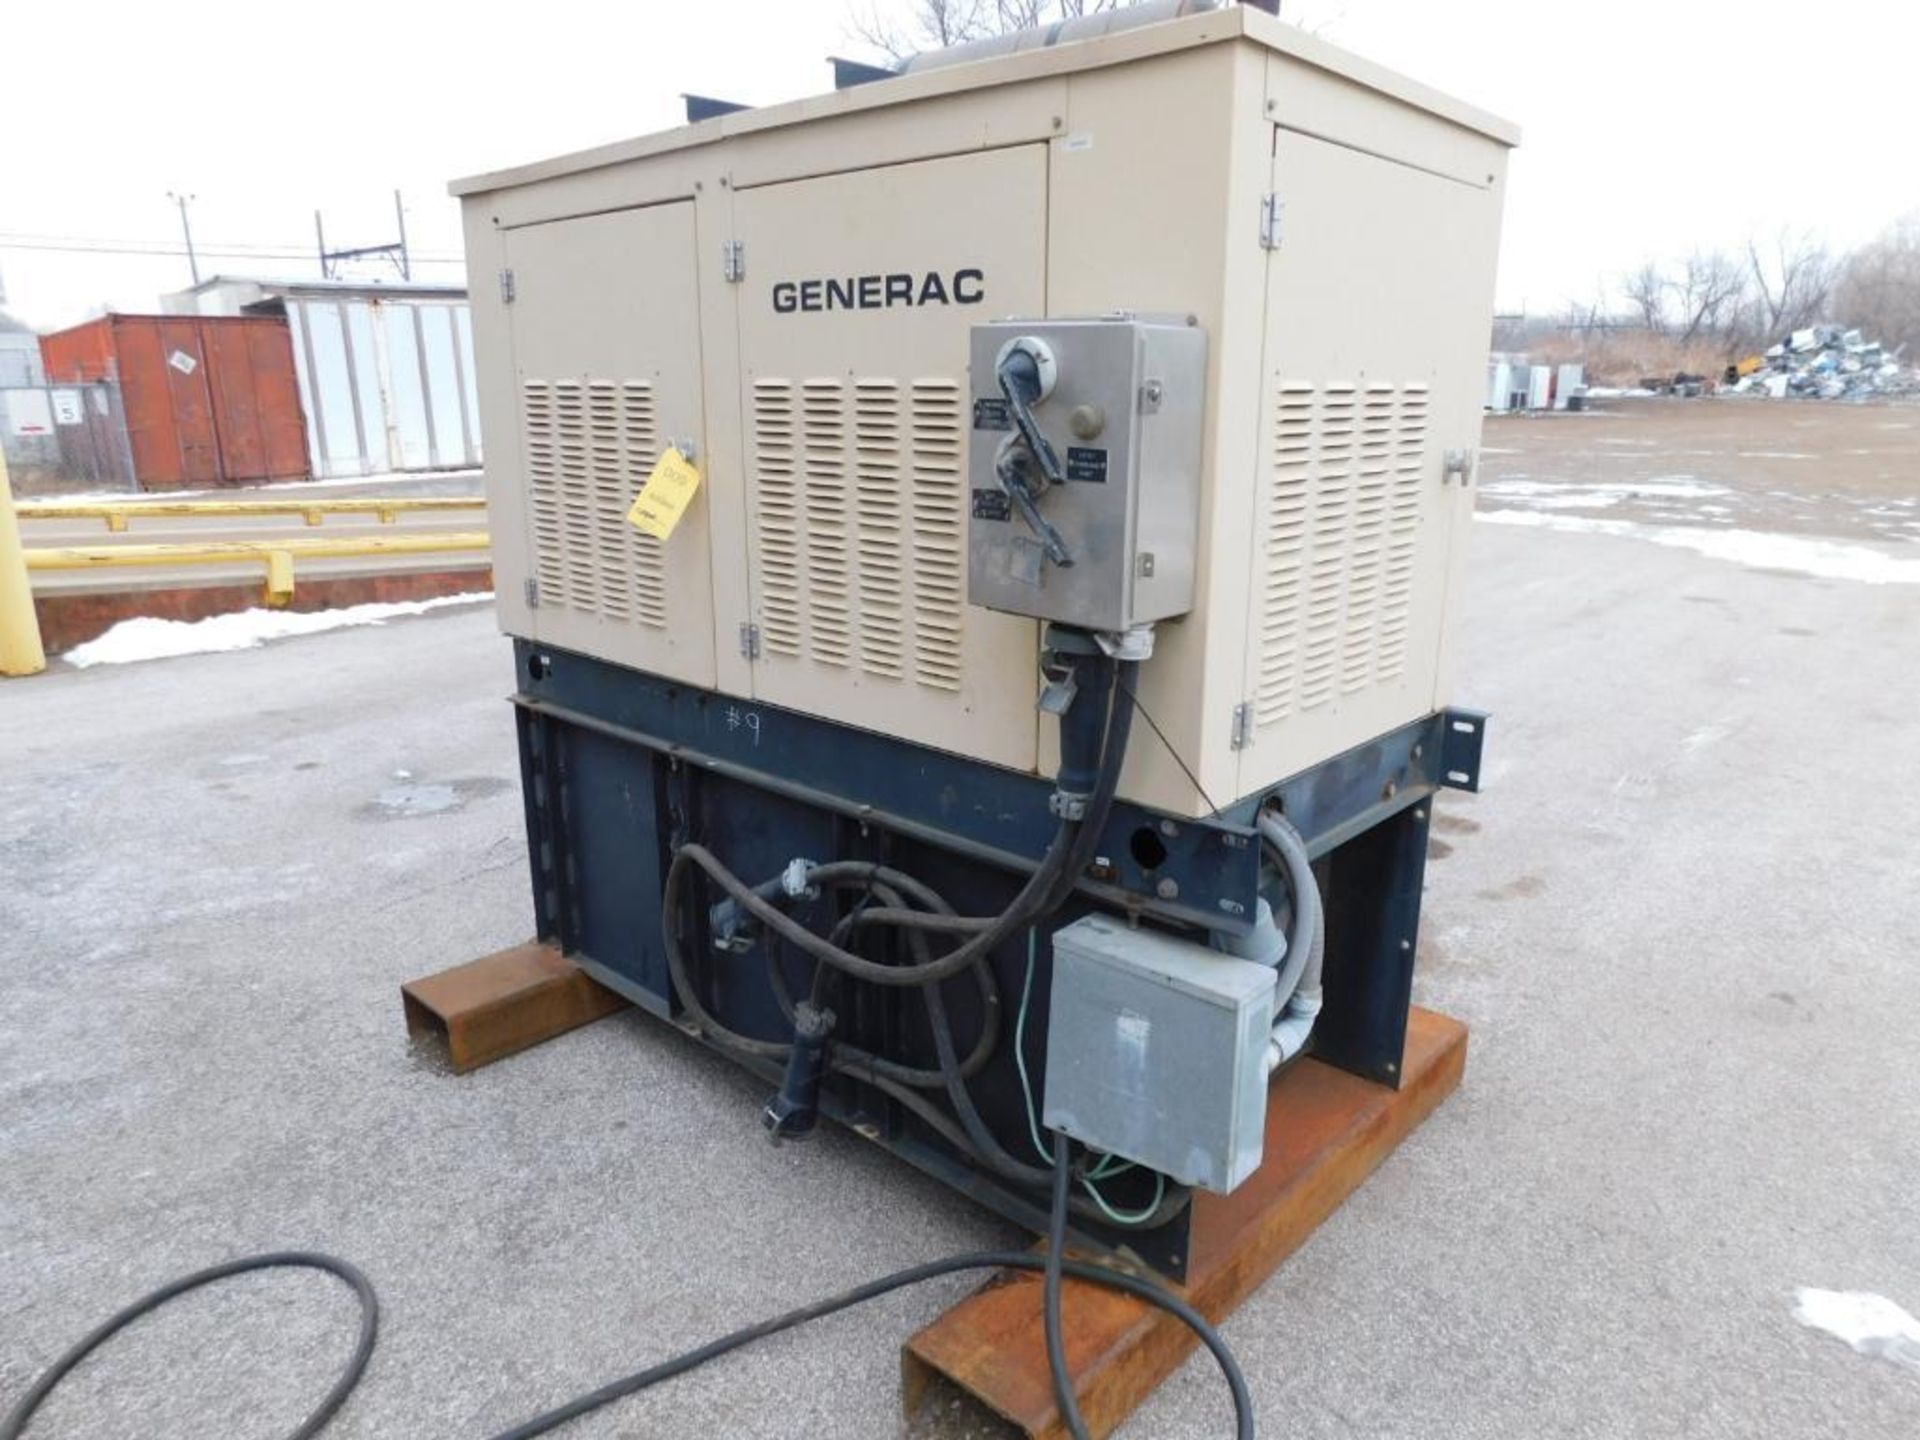 Generac Diesel Stand-By Generator Model 98A07400S, S/N SD025-A163, with Controls - Image 2 of 4